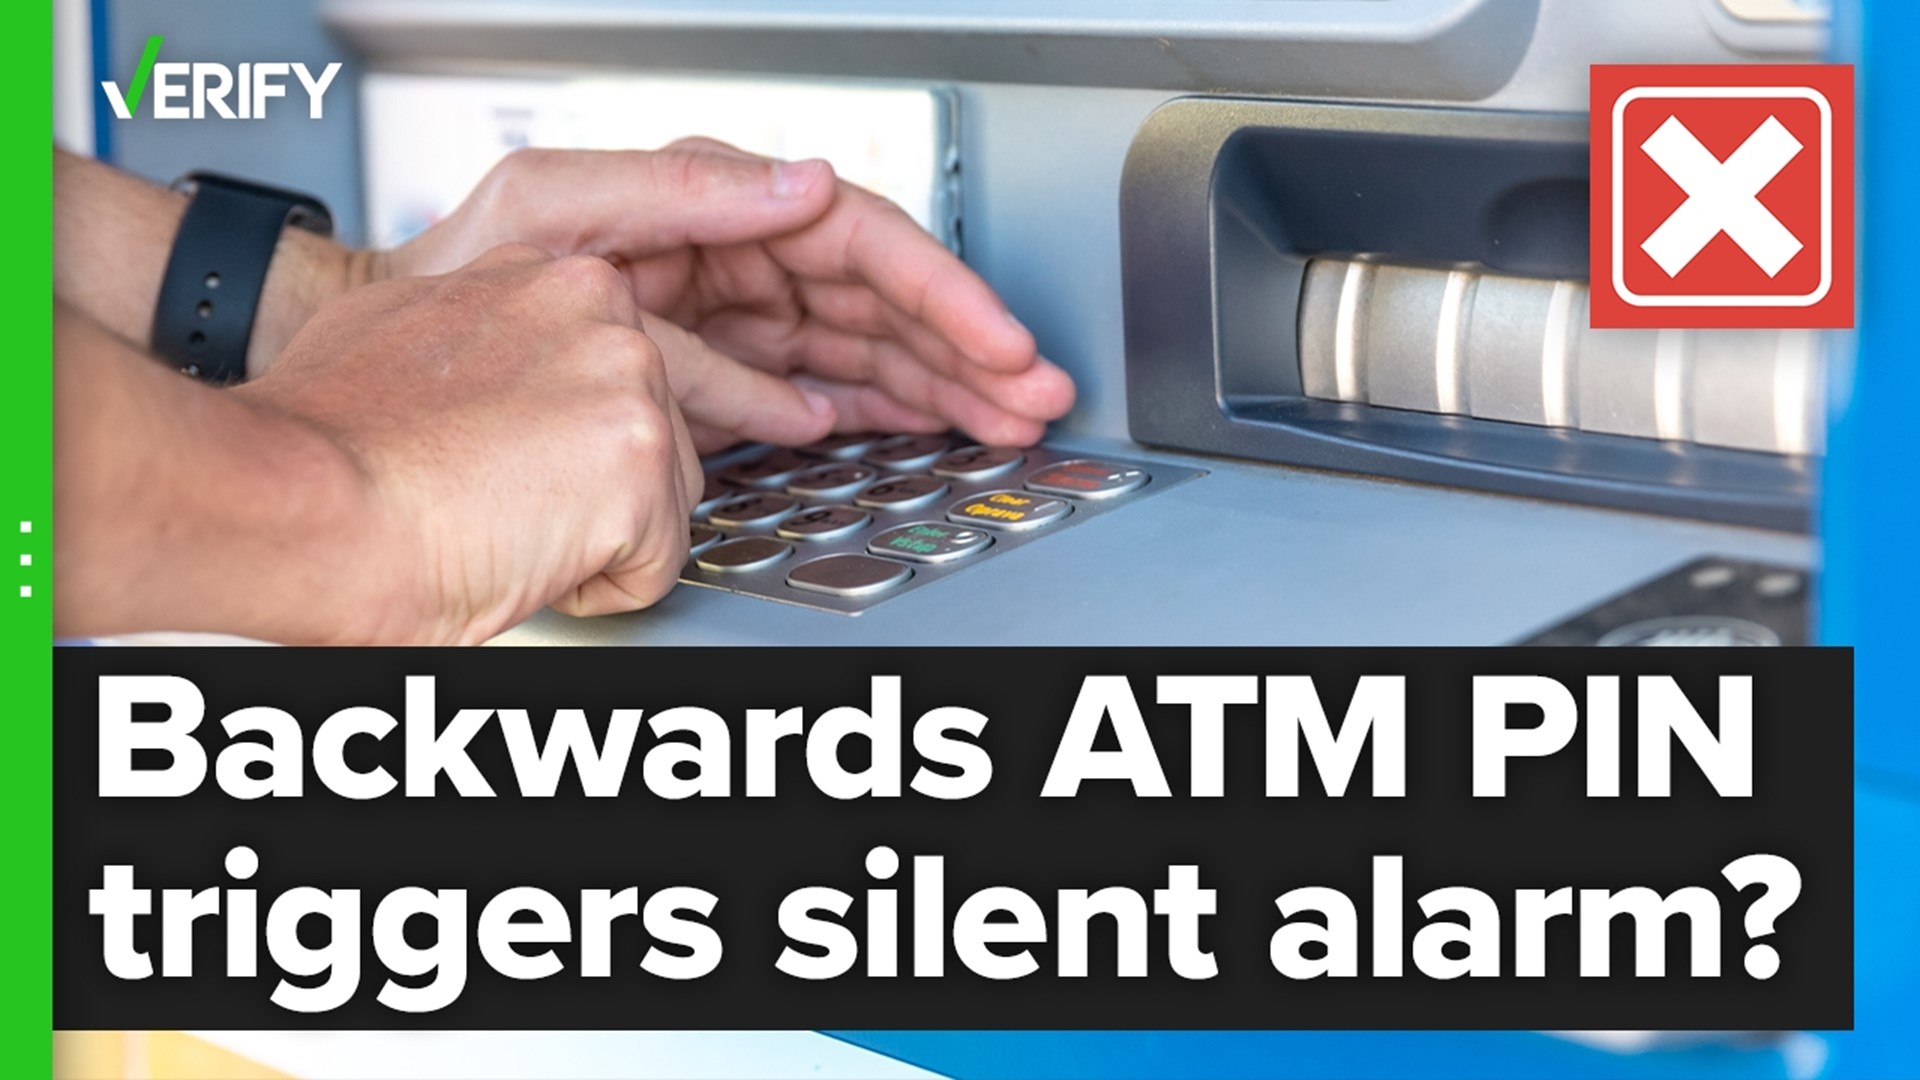 Online posts that claim a person who is being robbed at an ATM can notify the police by entering their PIN number in reverse are false. Here’s why.